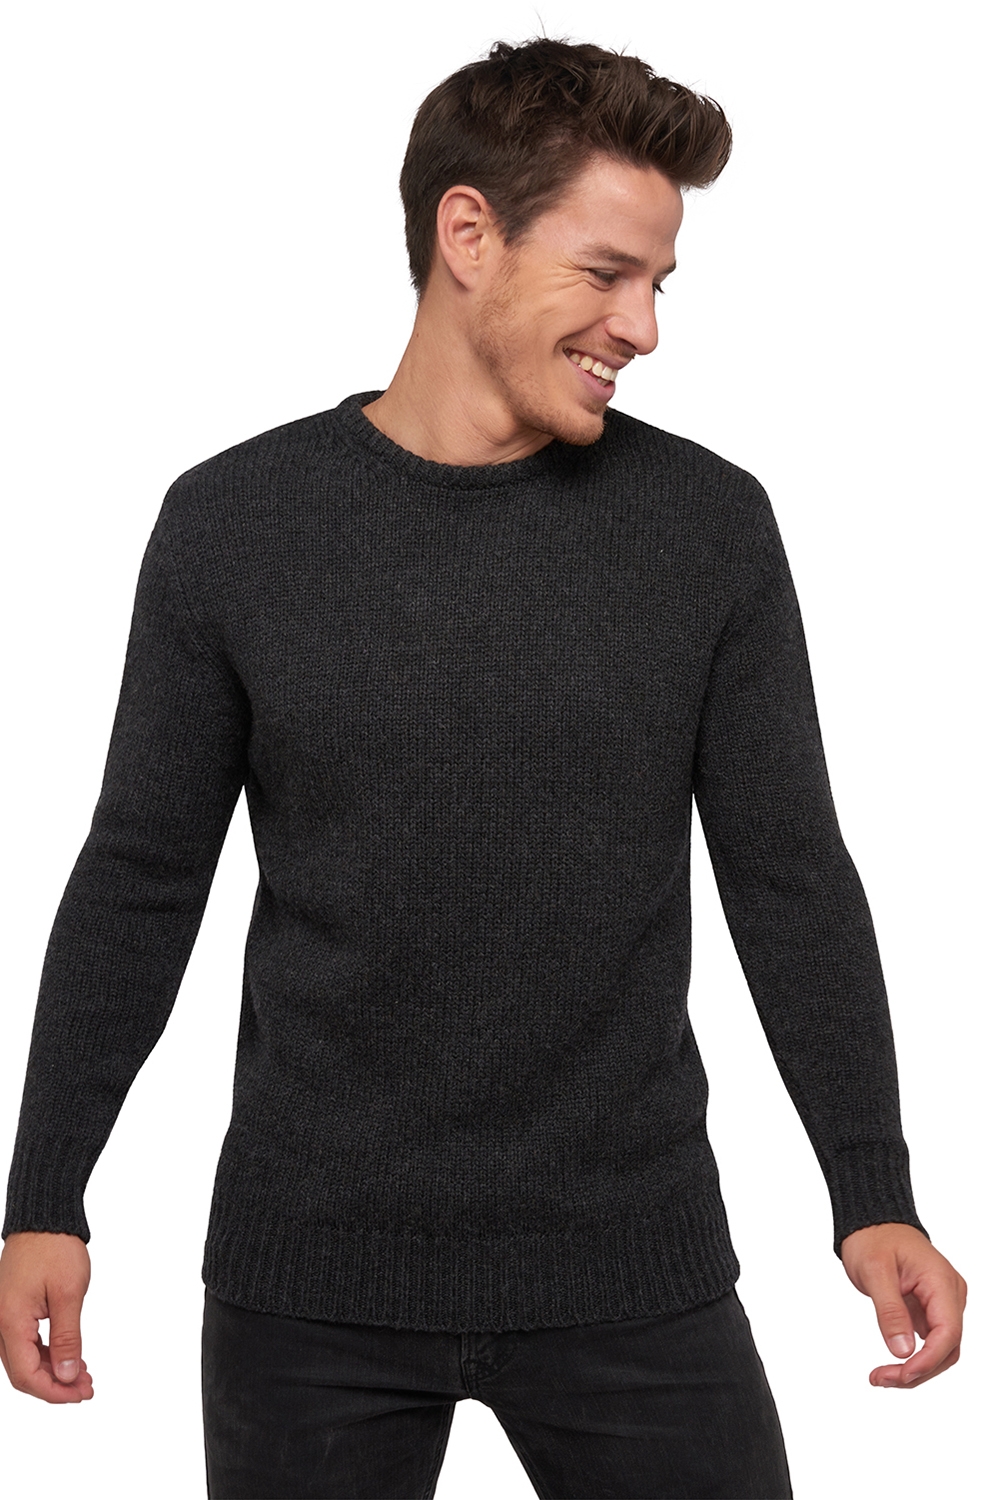 Chameau pull homme cole anthracite s